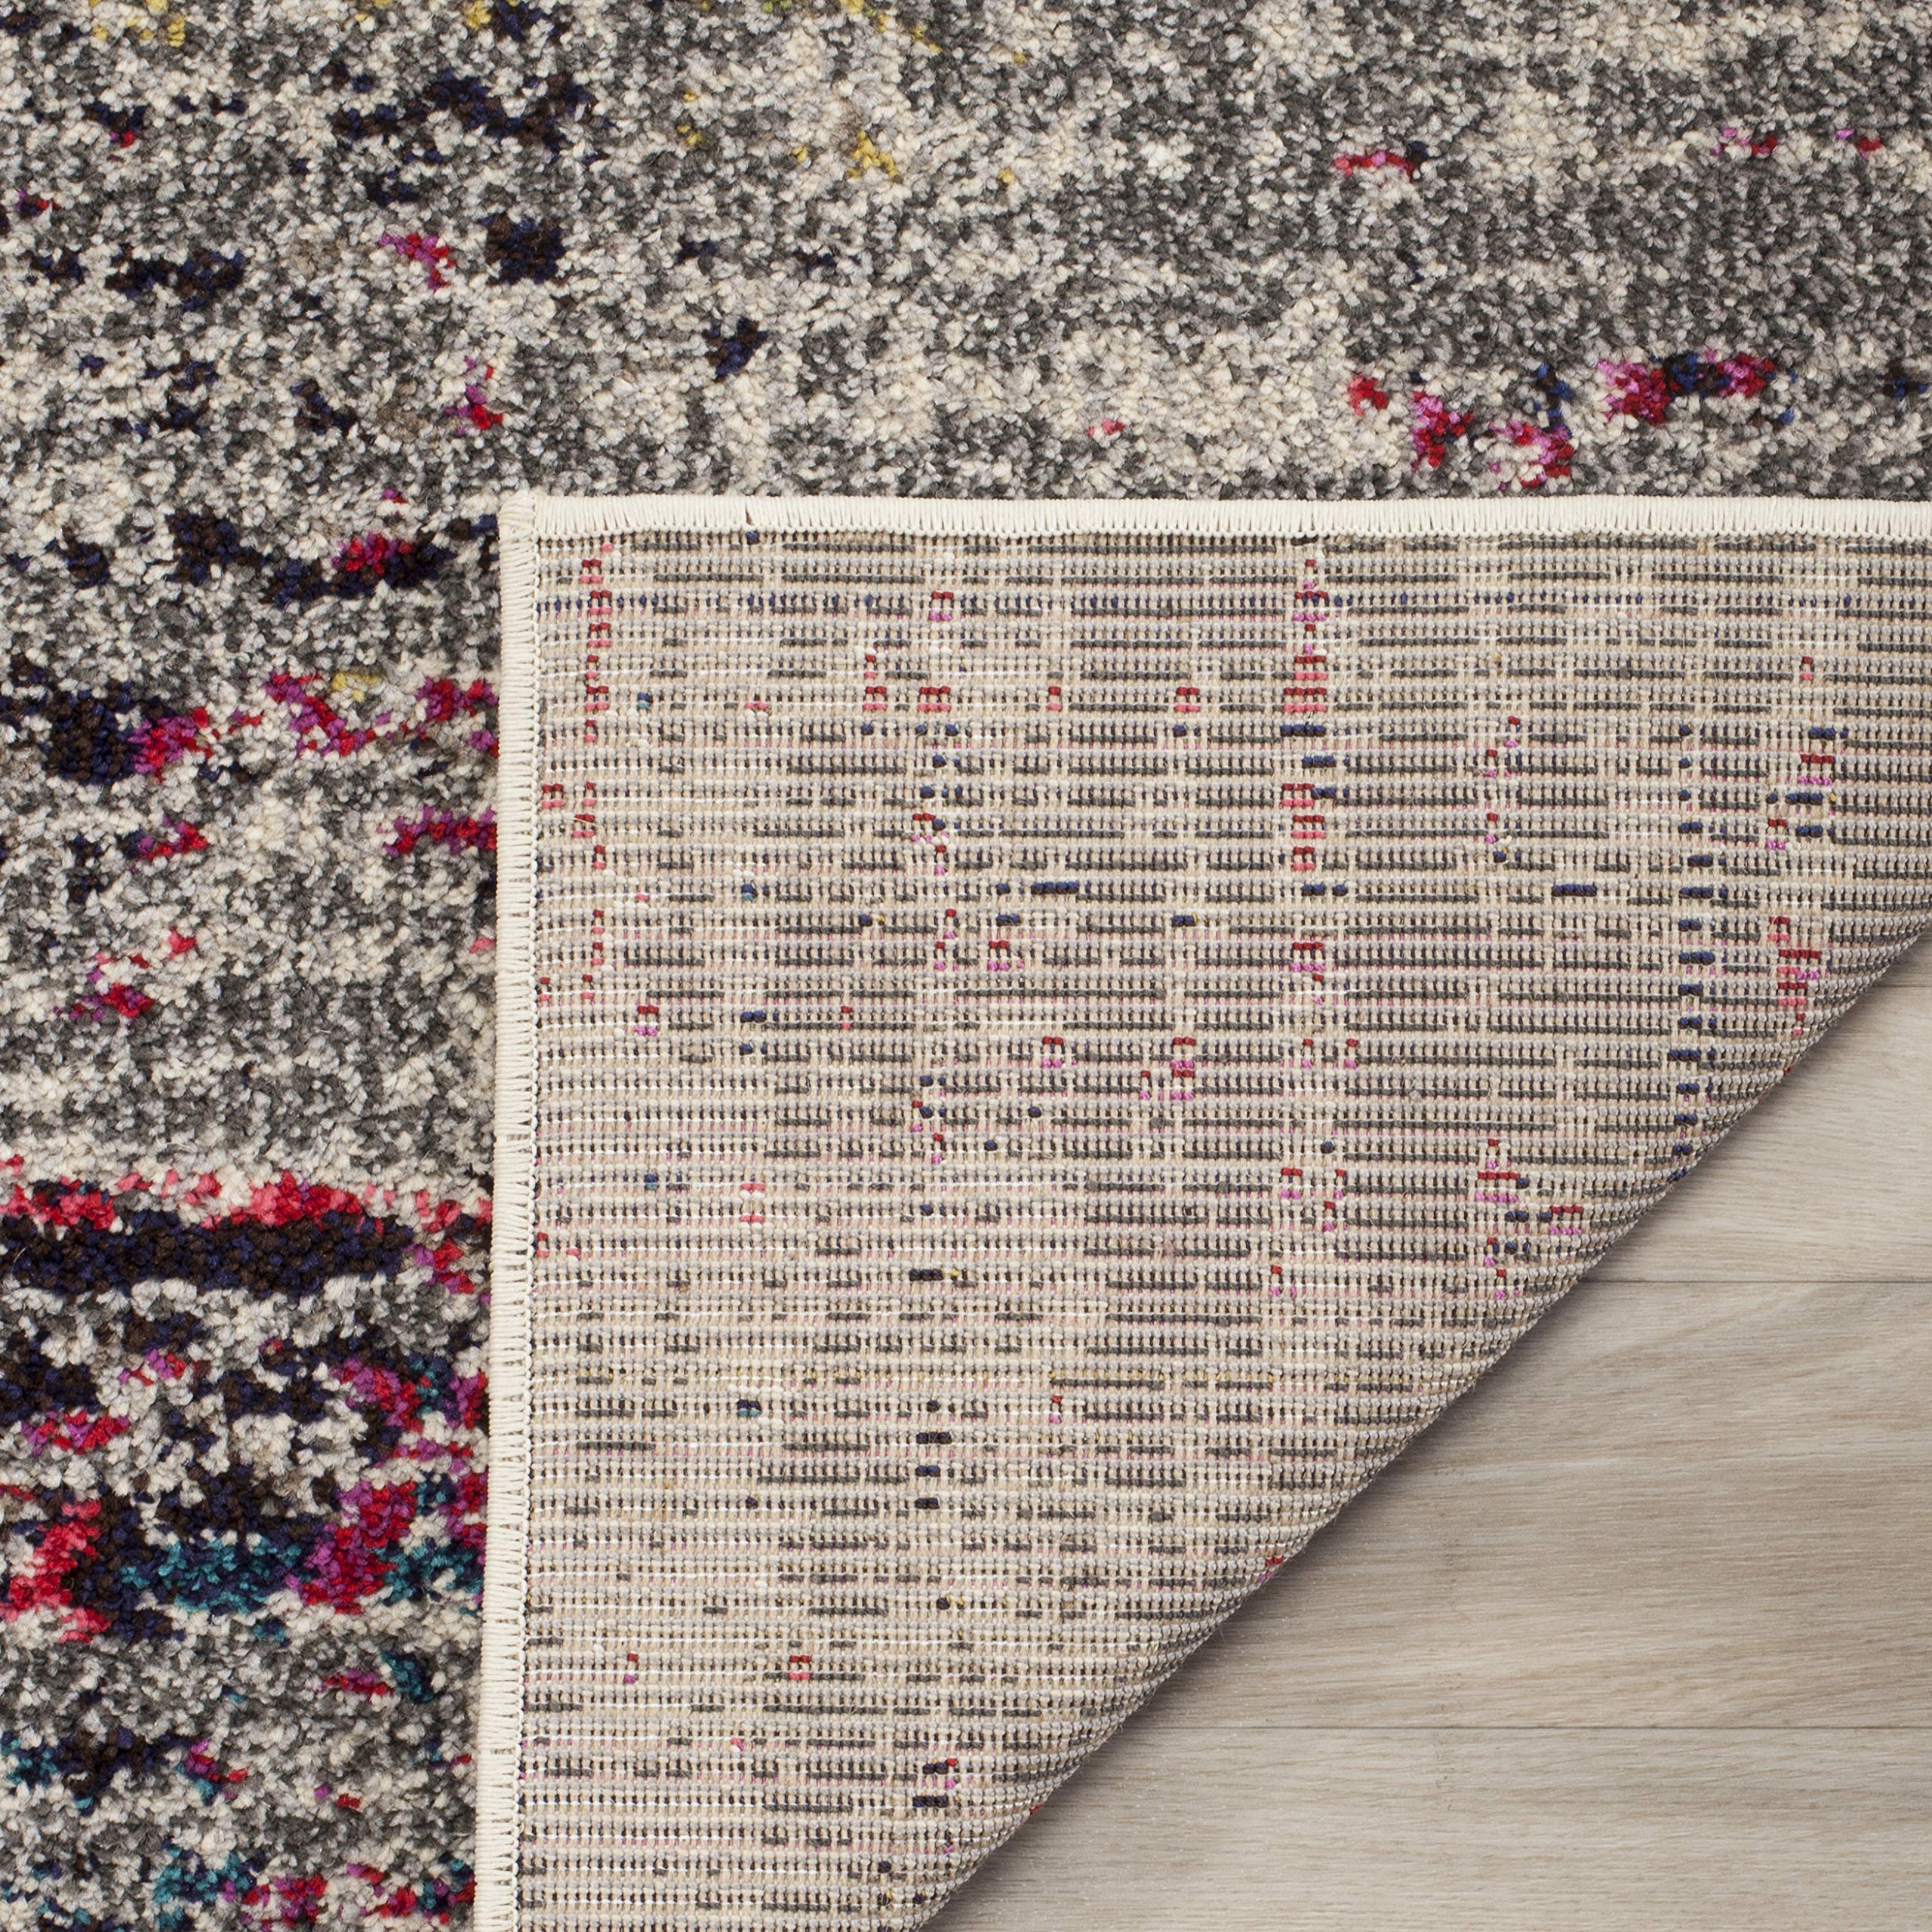 SAFAVIEH Monaco Collection Runner Rug - 2'2" x 8', Grey & Ivory, Modern Boho Abstract Distressed Design, Non-Shedding & Easy Care, Ideal for High Traffic Areas in Living Room, Bedroom (MNC209T)